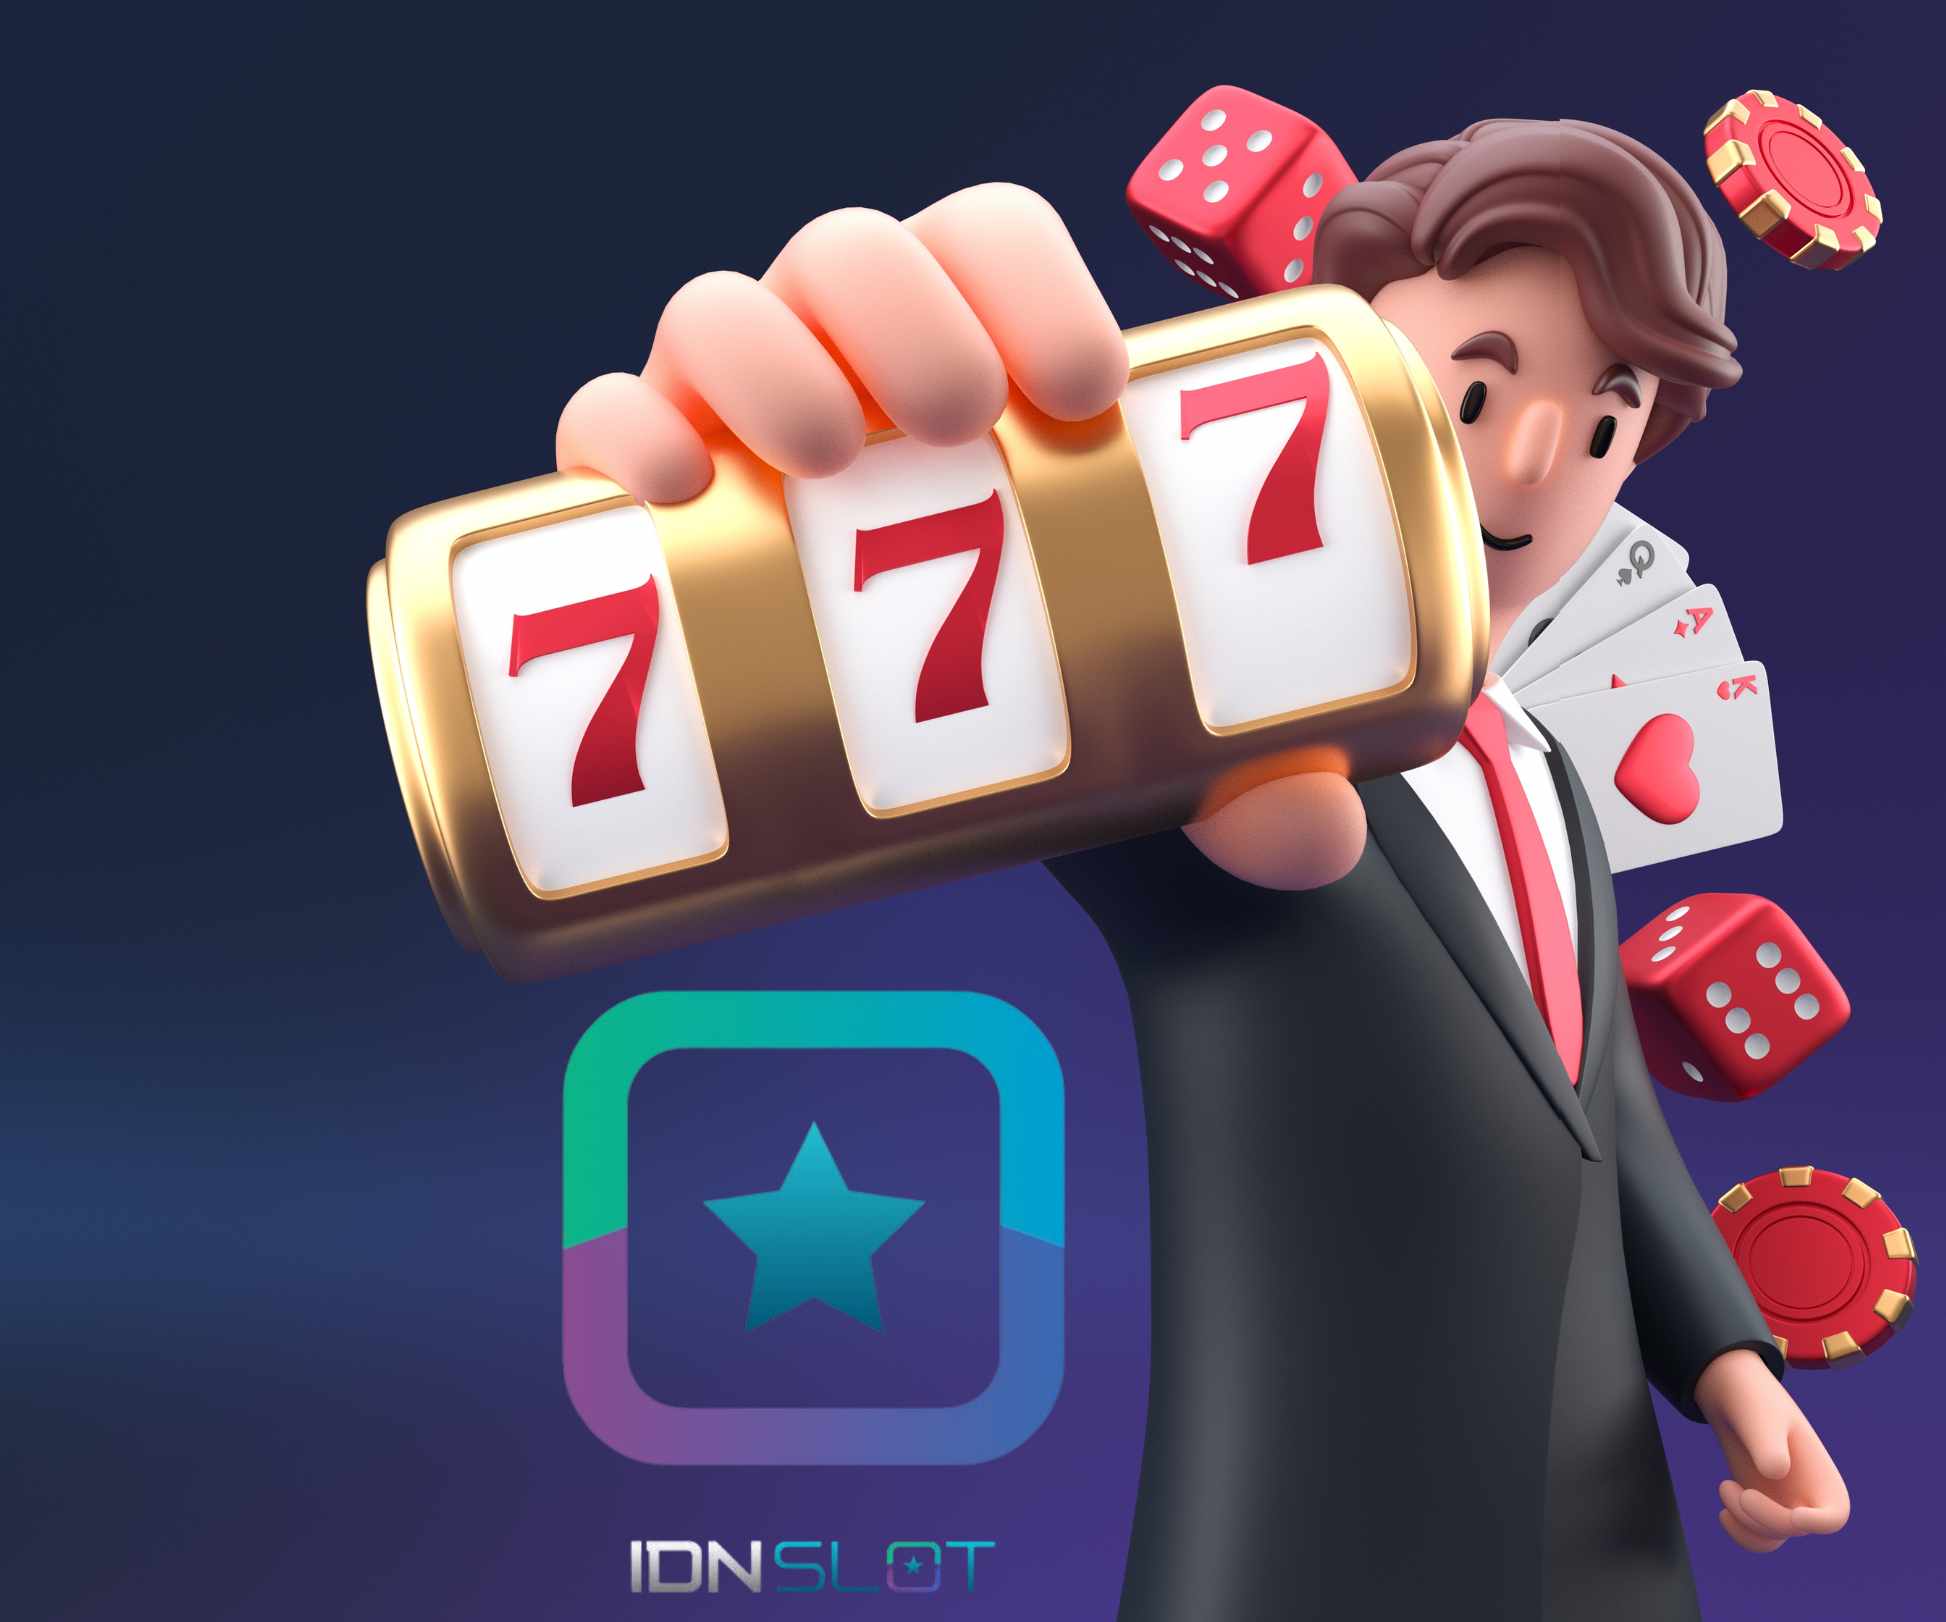 Idn slot exciting game IDN Play with various famous slots